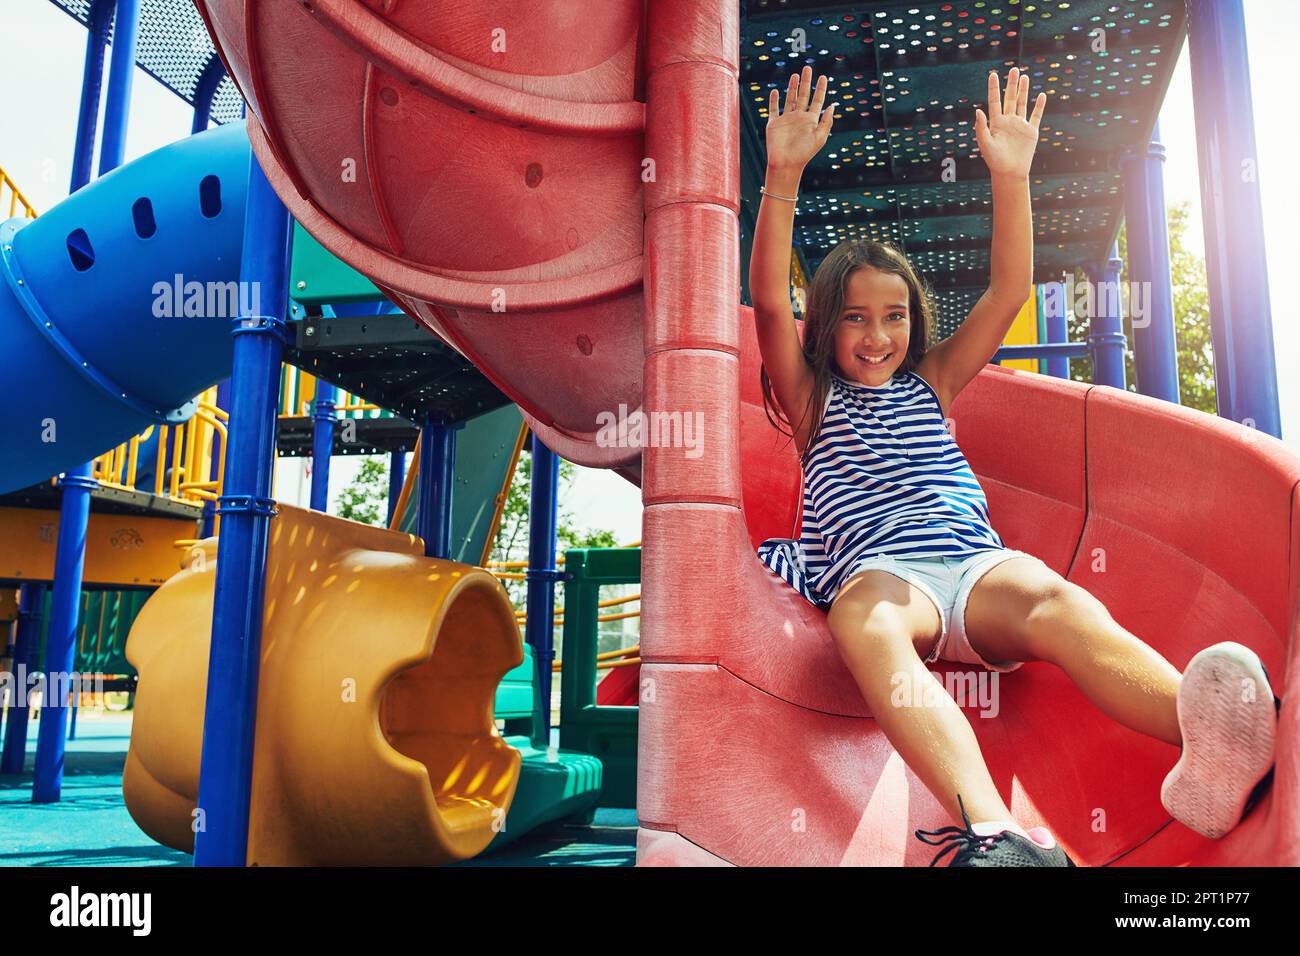 https://c8.alamy.com/comp/2PT1P77/sliding-into-the-fun-a-young-girl-sliding-down-the-slide-on-a-jungle-gym-in-the-park-2PT1P77.jpg